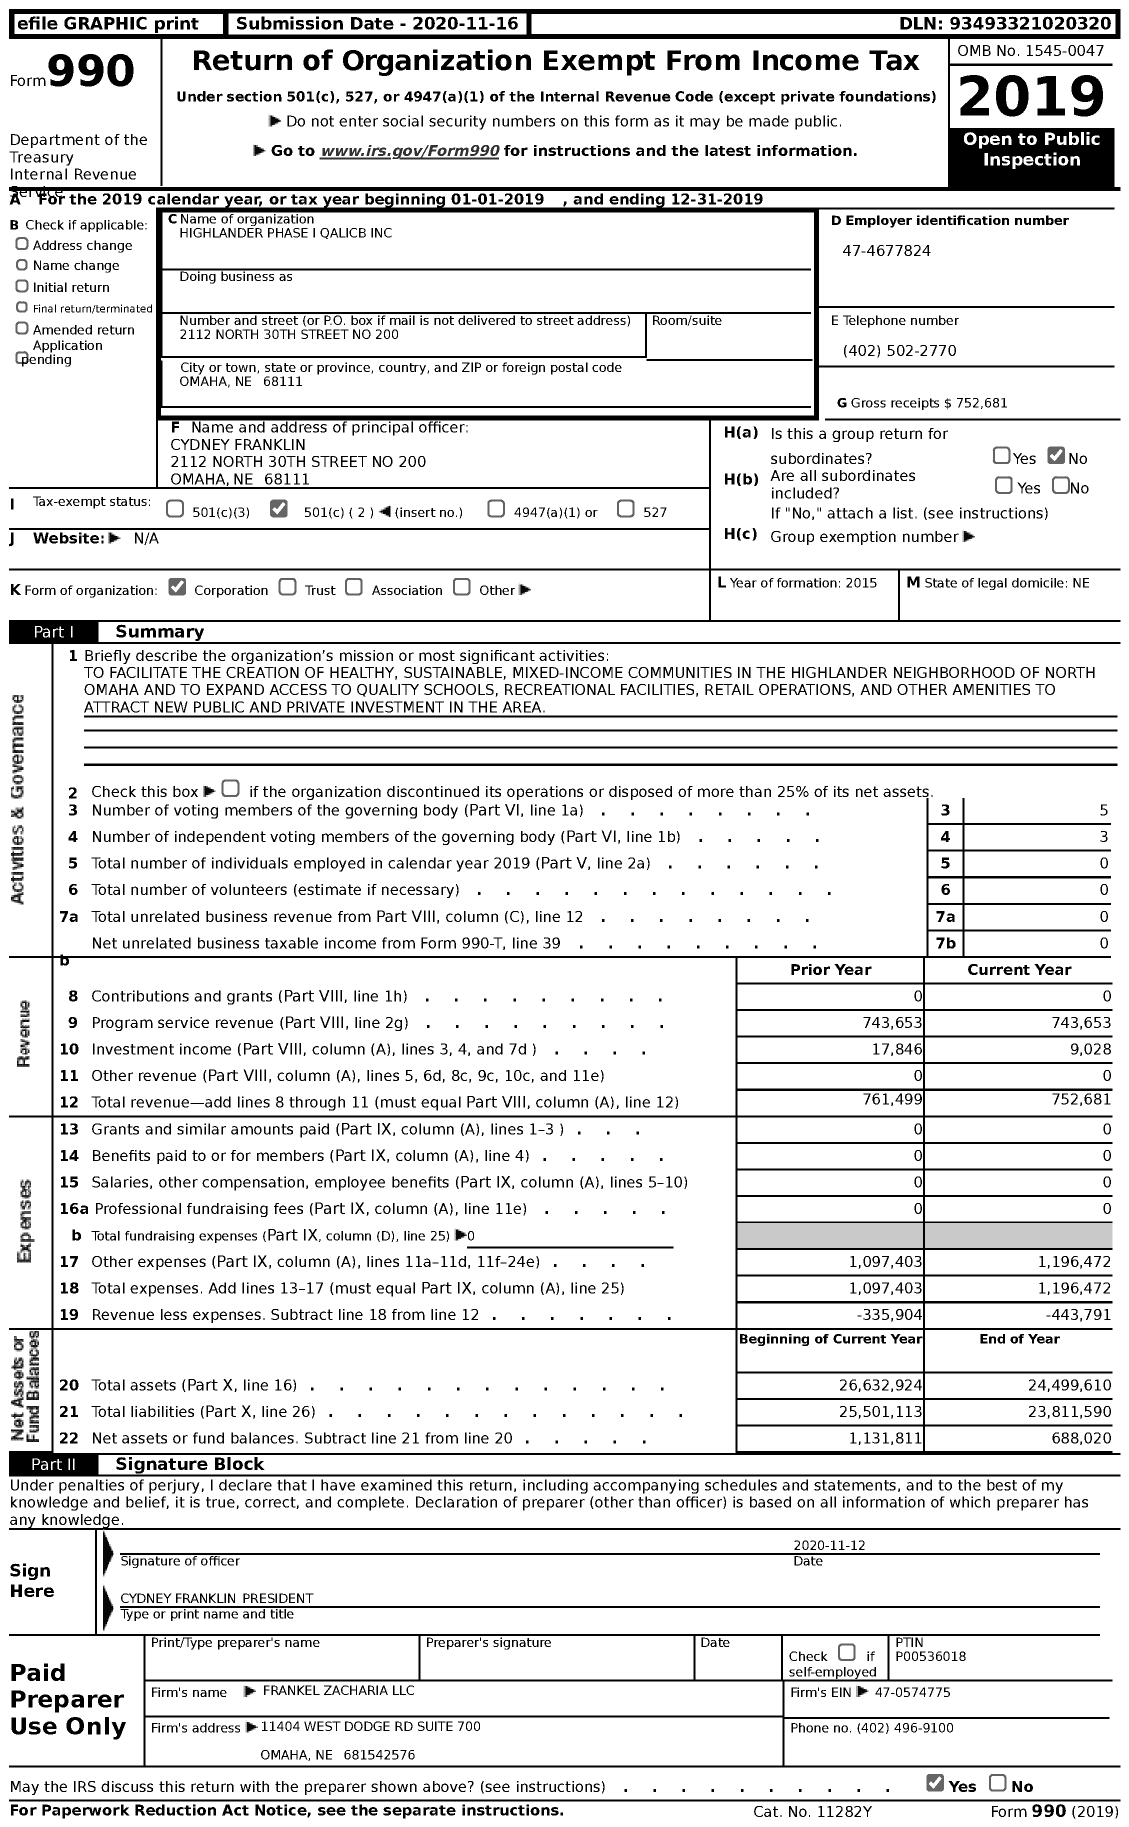 Image of first page of 2019 Form 990 for Highlander Phase I Qalicb